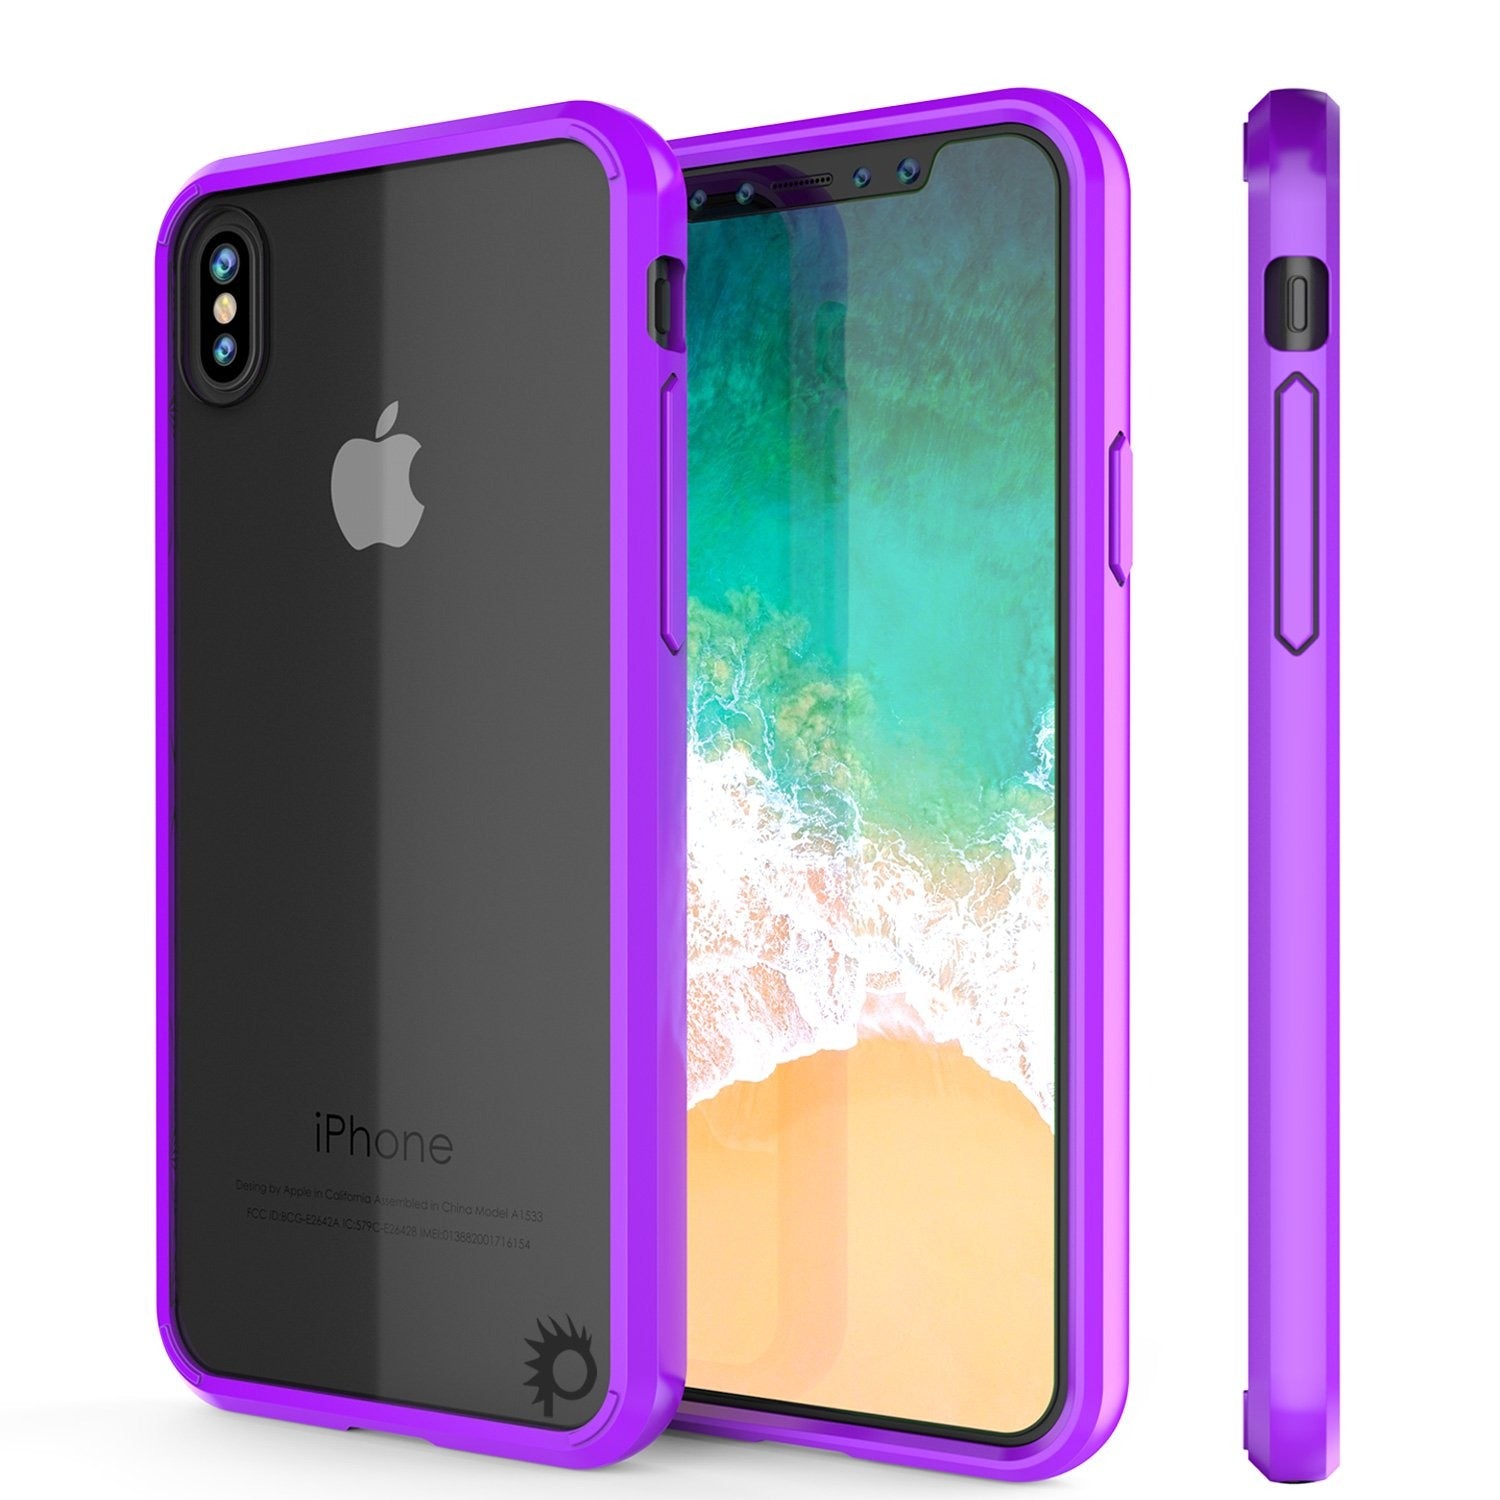 iPhone X Case, PUNKcase [LUCID 2.0 Series] [Slim Fit] Armor Cover W/Integrated Anti-Shock System [Purple] - PunkCase NZ